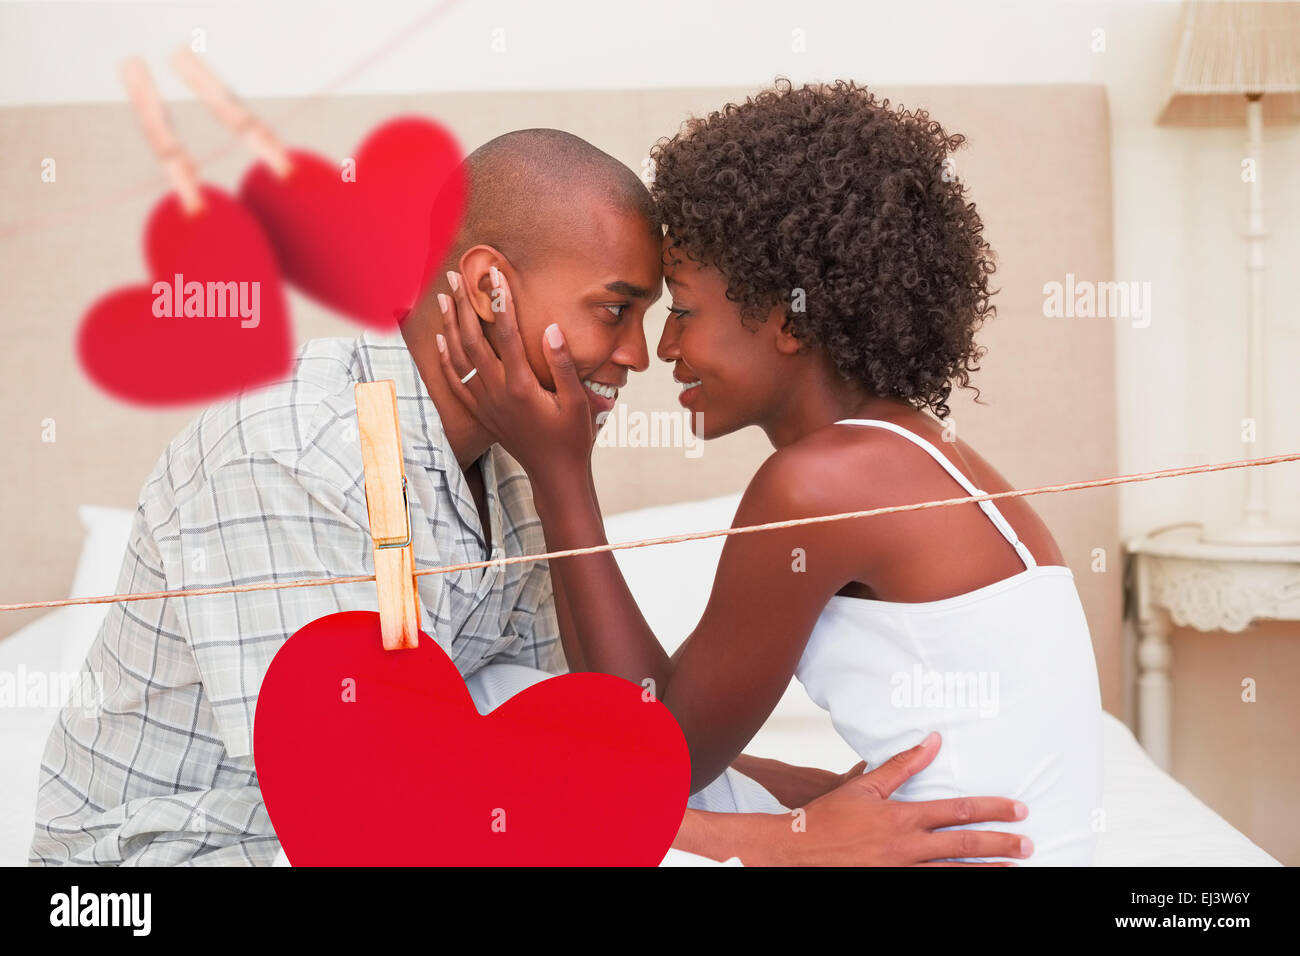 Composite image of happy couple showing affection on bed Stock Photo